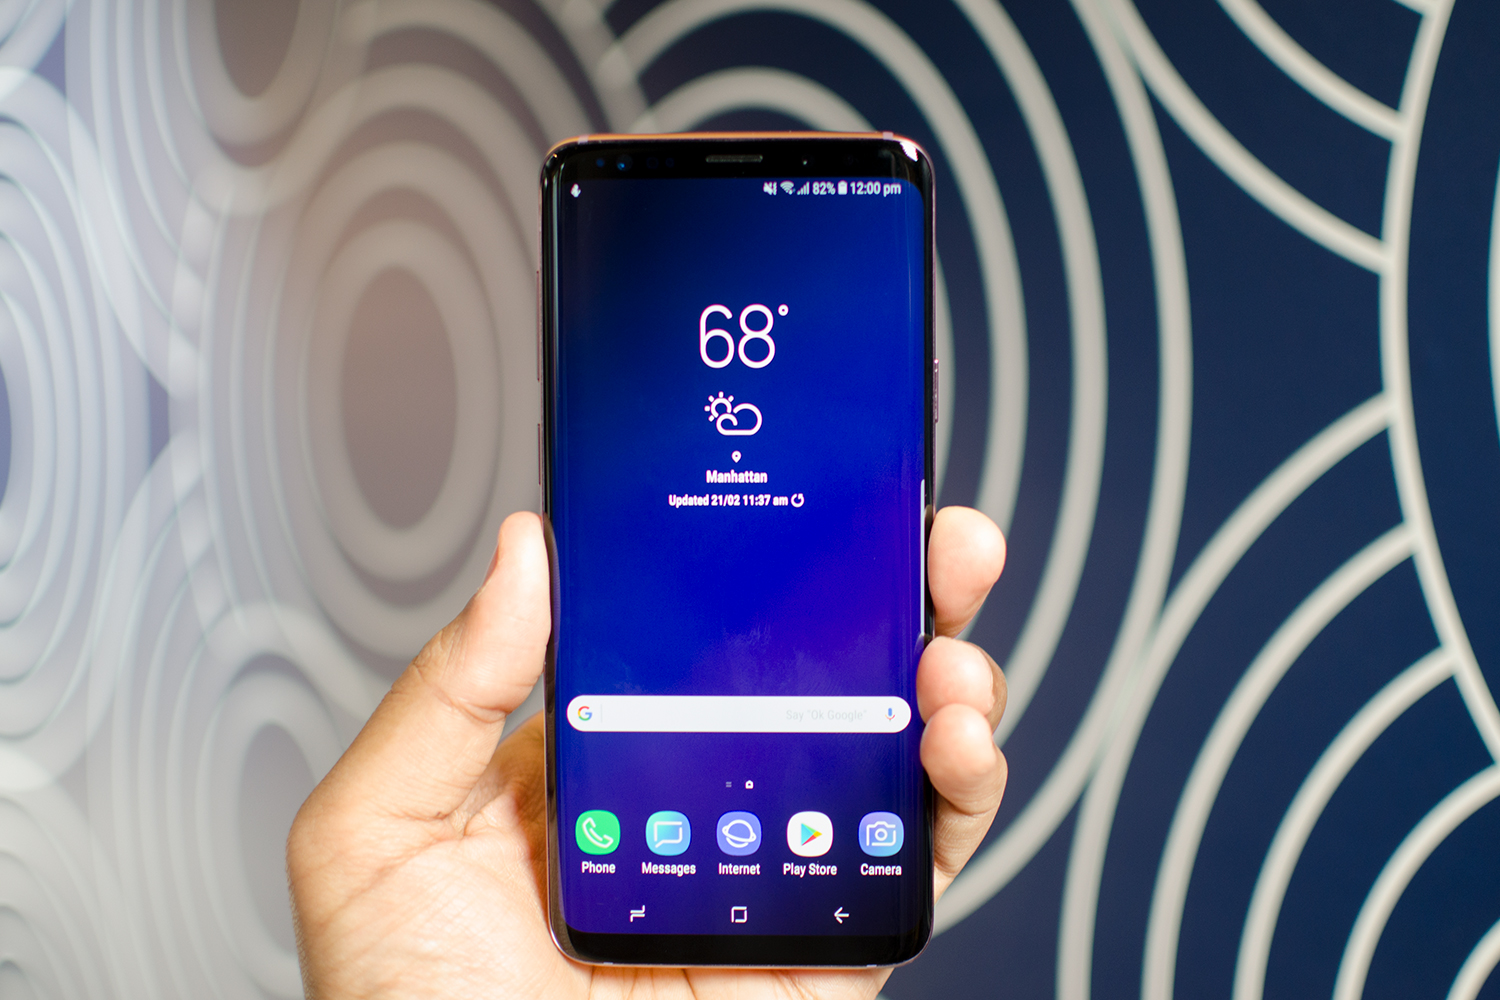 Samsung Galaxy S9 and S9 Plus: The best new features - PhoneArena